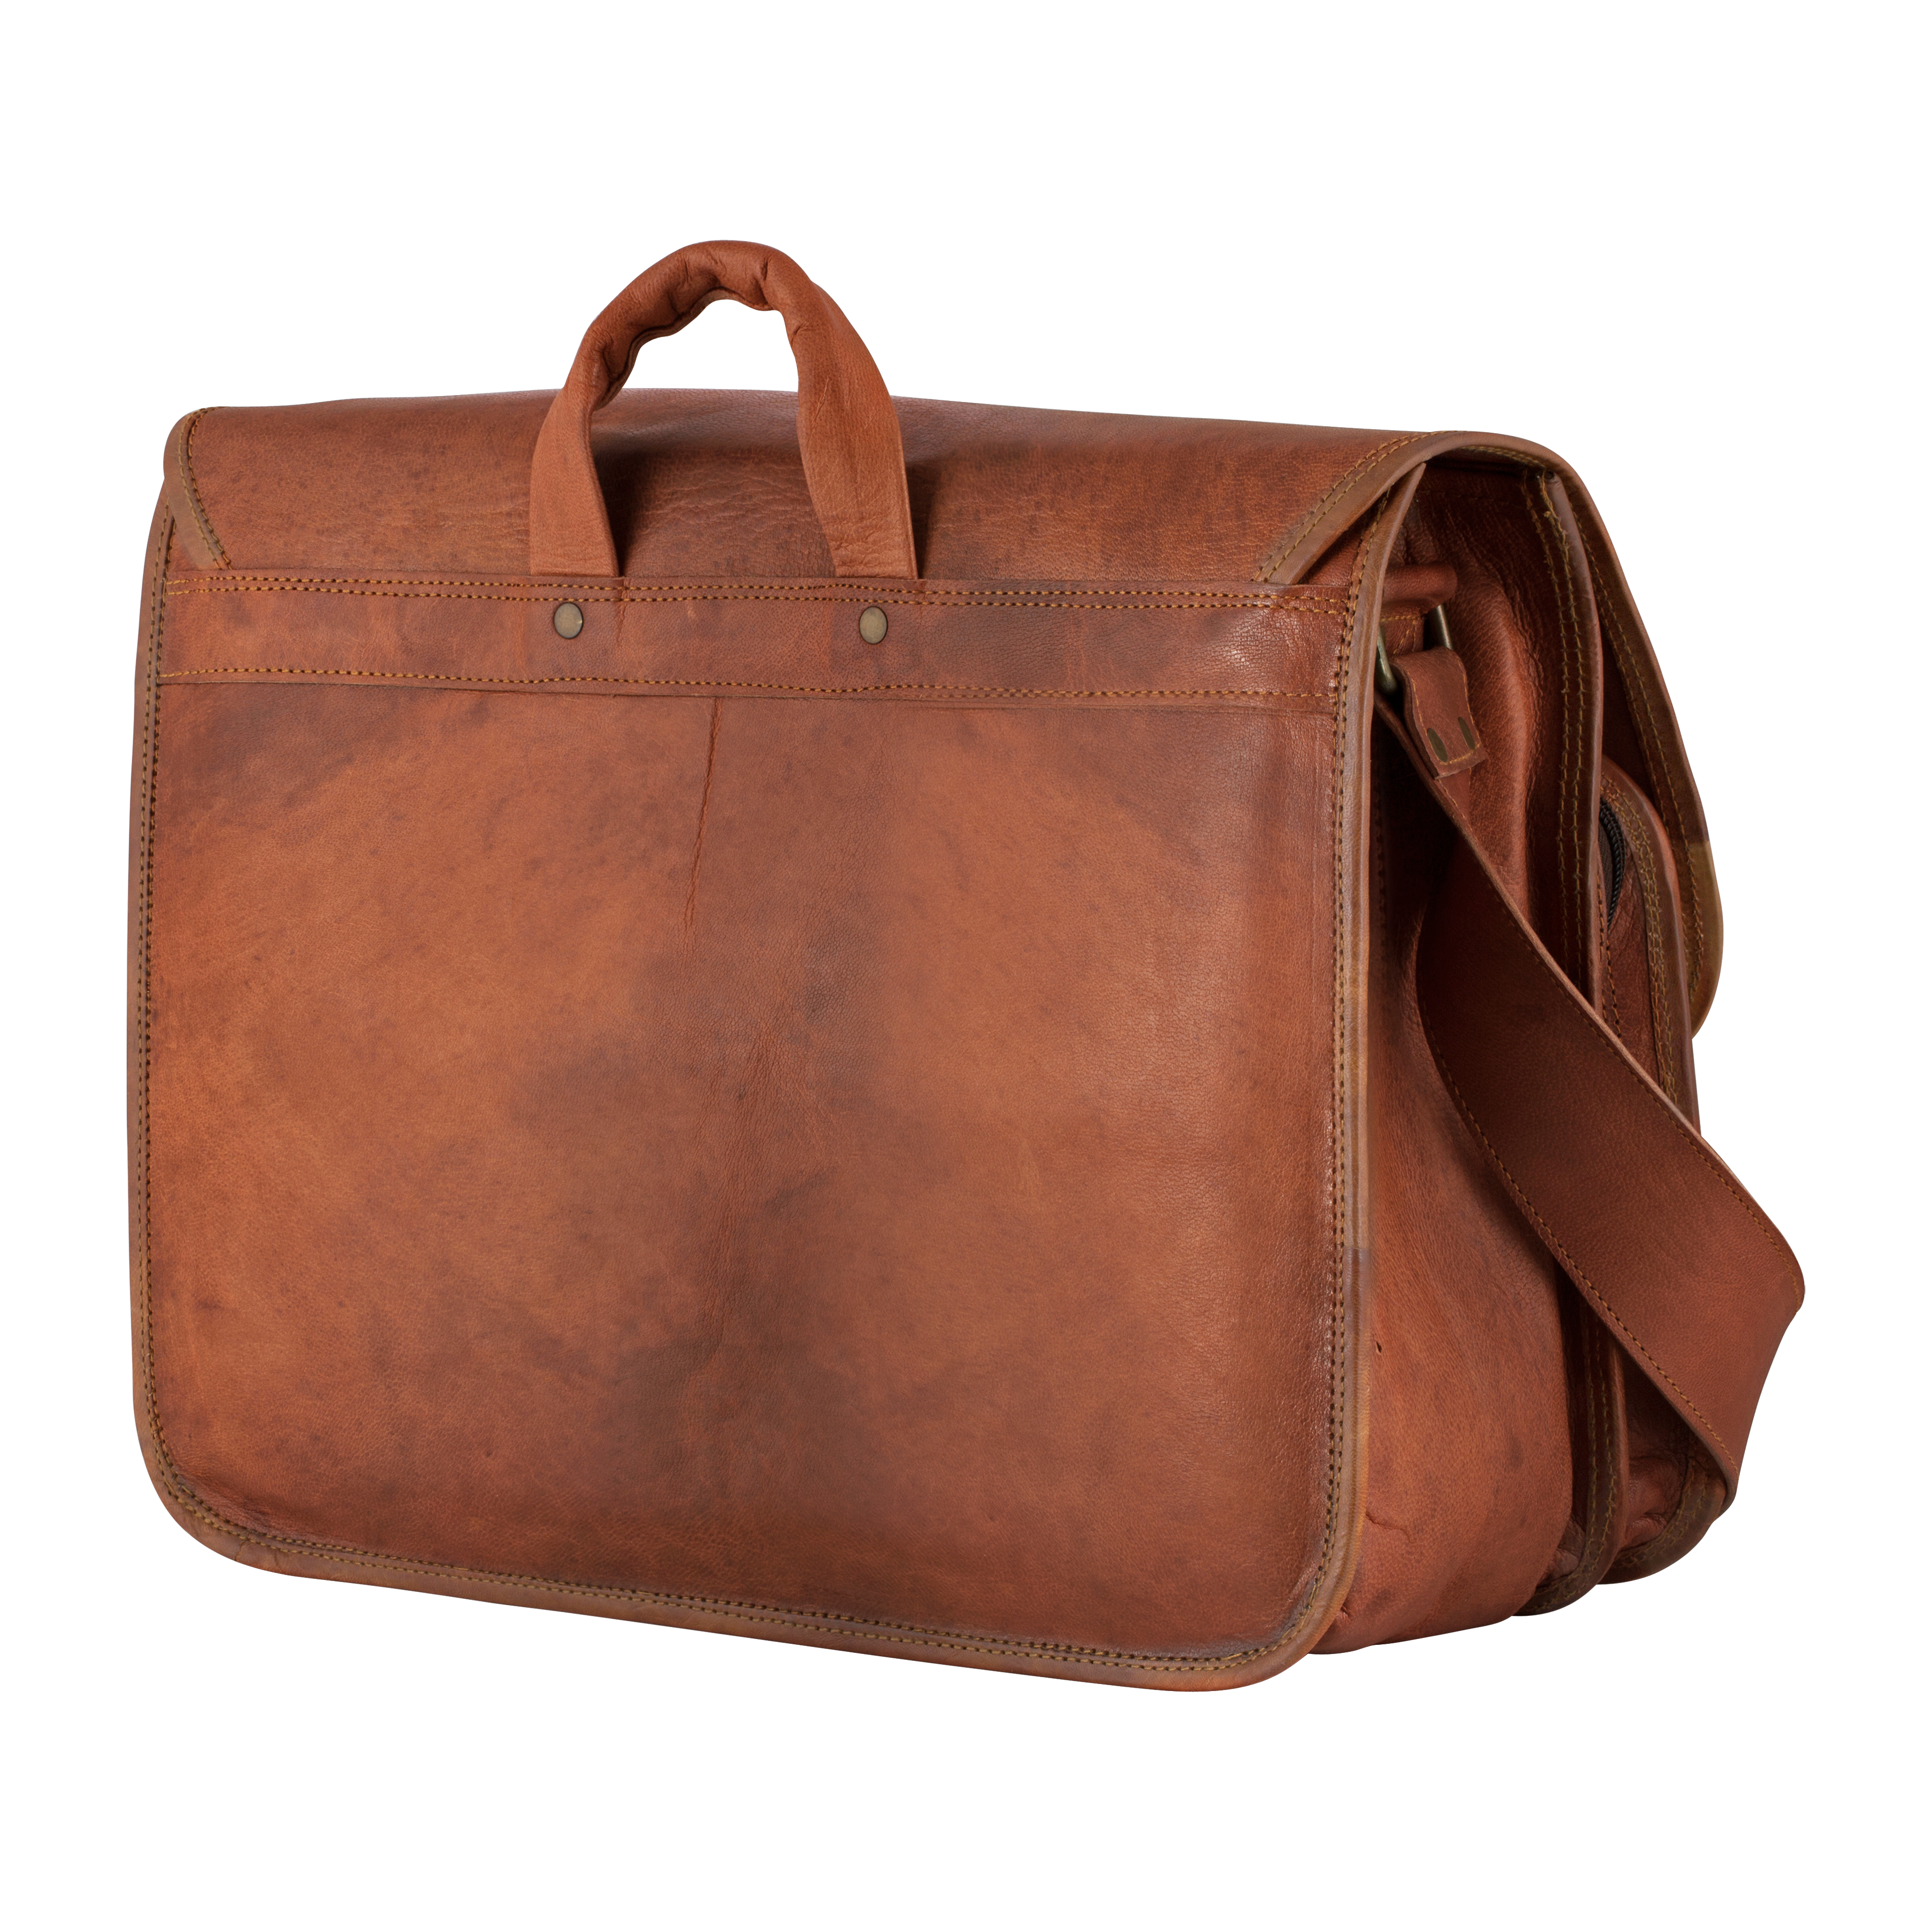 Studio Camera bag - Johnny Fly - Leather Bags